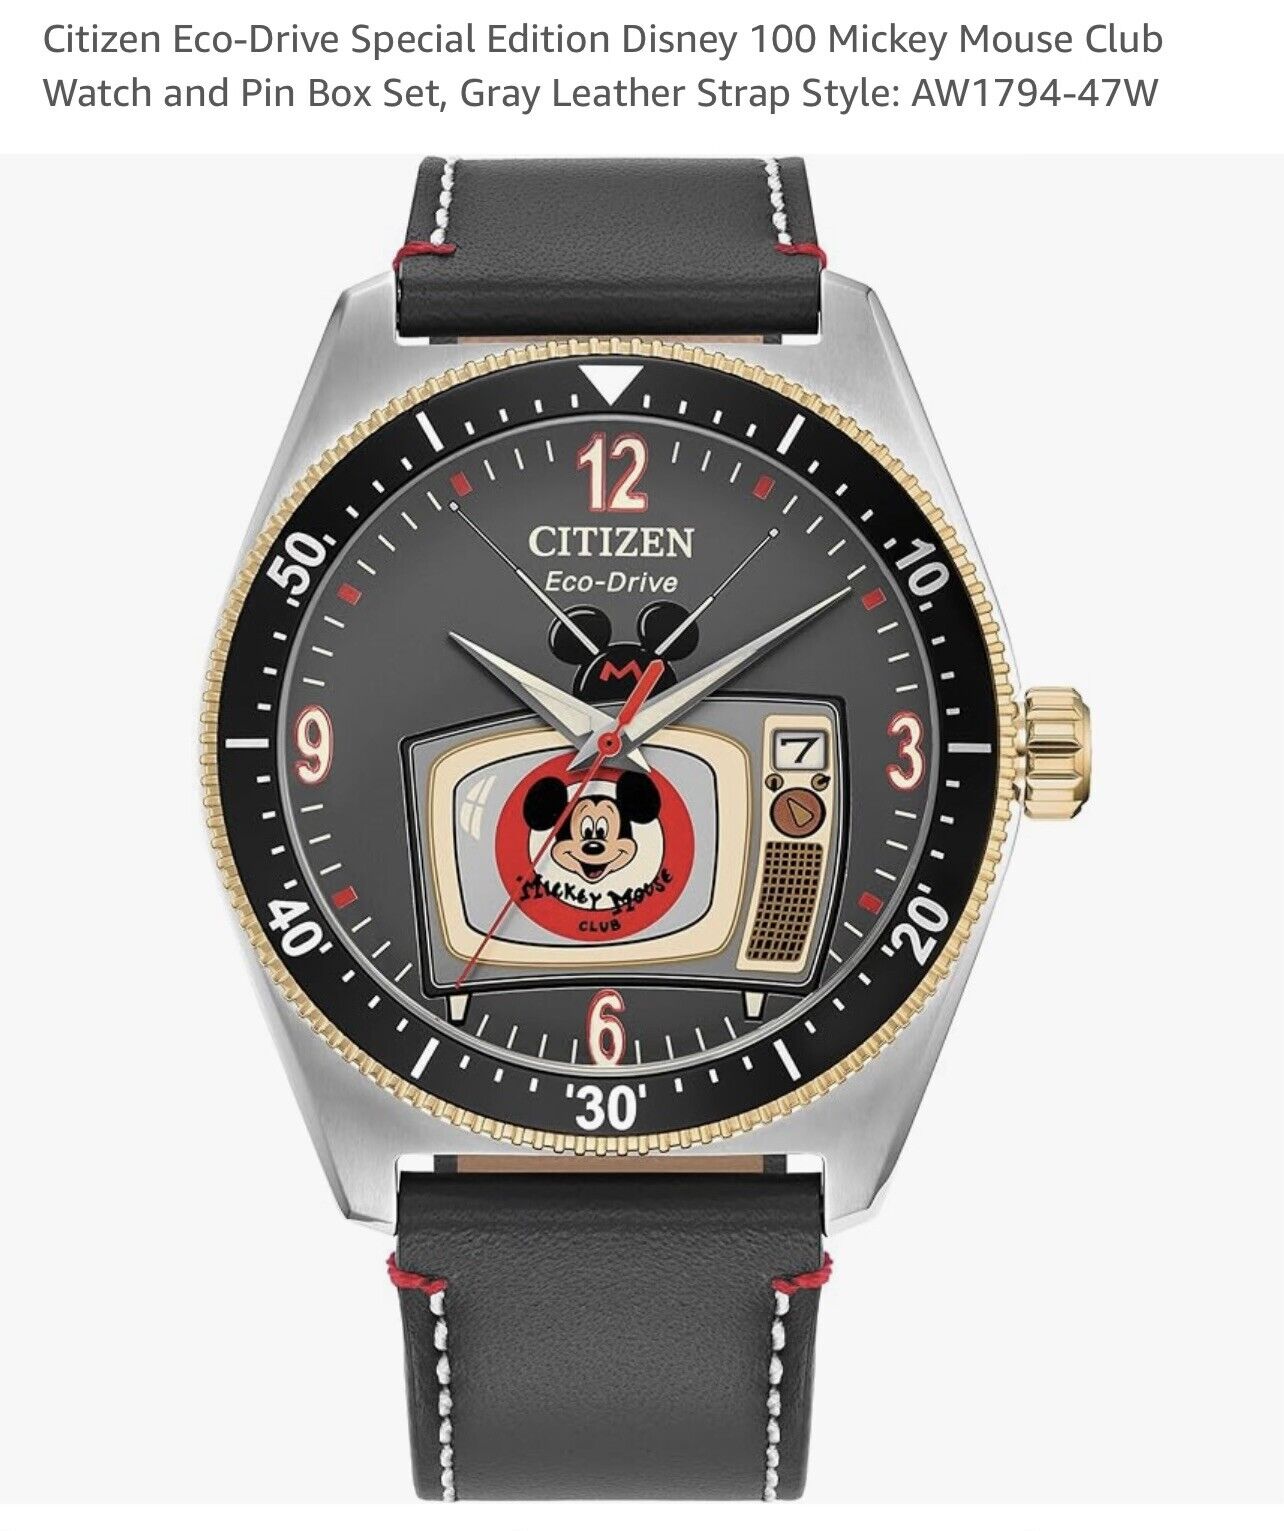 Citizen Eco-Drive Special Edition Disney 100 Mickey Mouse Club Watch and Pin Box